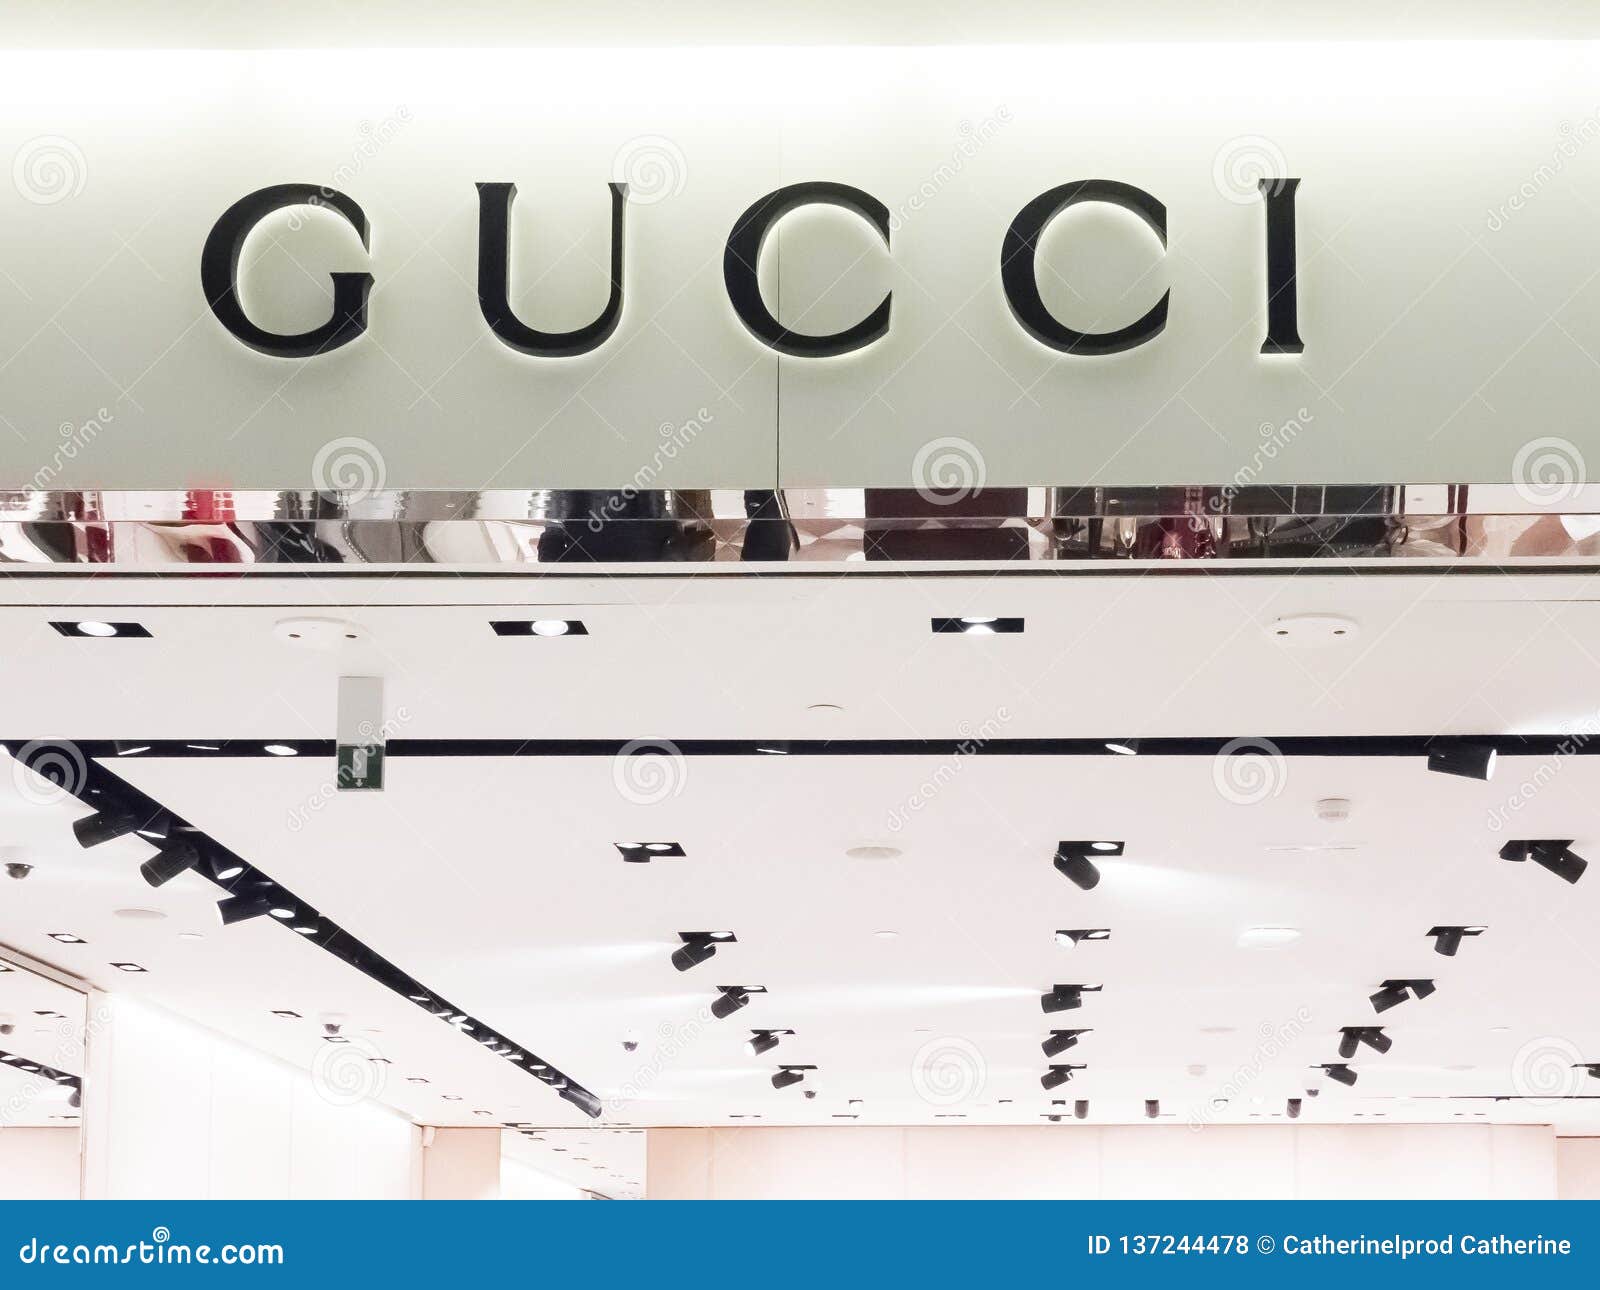 Gucci Store Front In The Mall In Paris Airport. Gucci Is An Italian Luxury Brand Of Fashion And ...